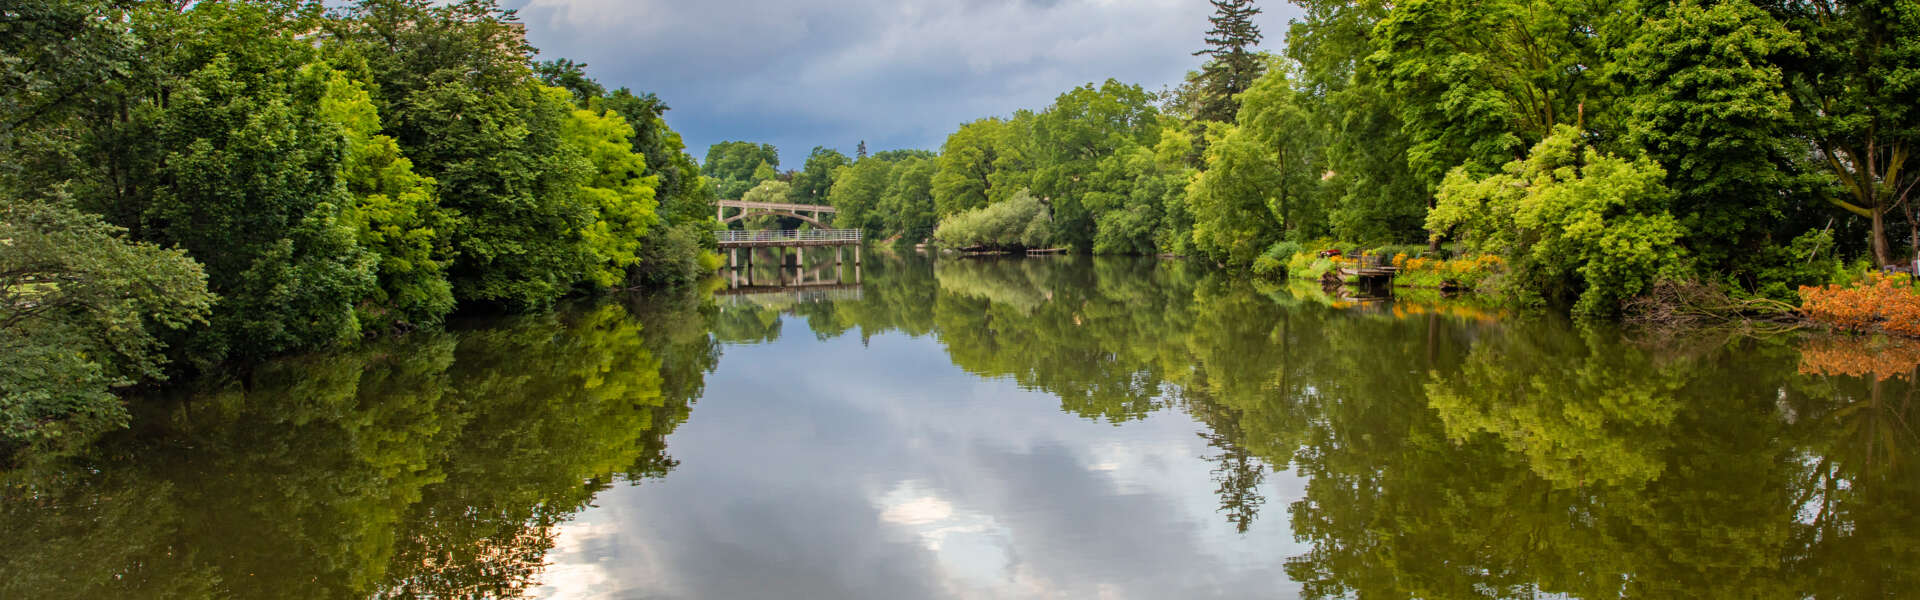 a wide vide of tree-lined river and the sky reflecting on still water